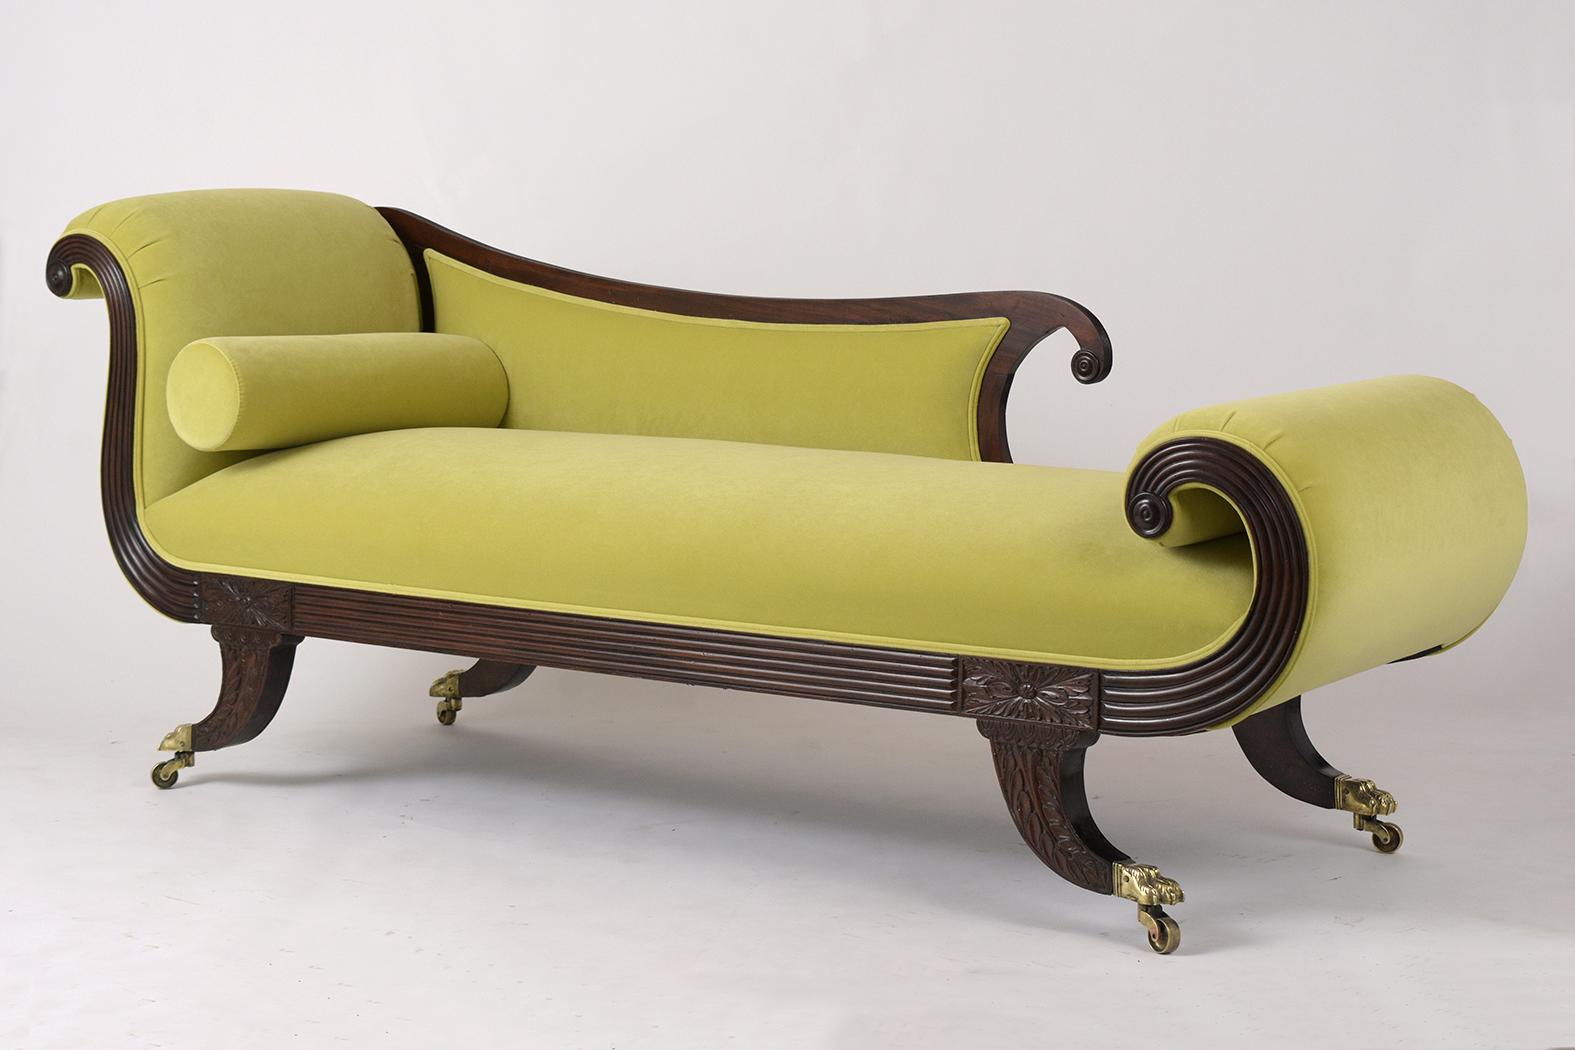 This English Empire style chaise lounge early 1800s is made out of solid Flemish mahogany wood and has been professionally restored. It features a scrolling design on the back armrest and legs and has remarkable hand carved details. The frame has